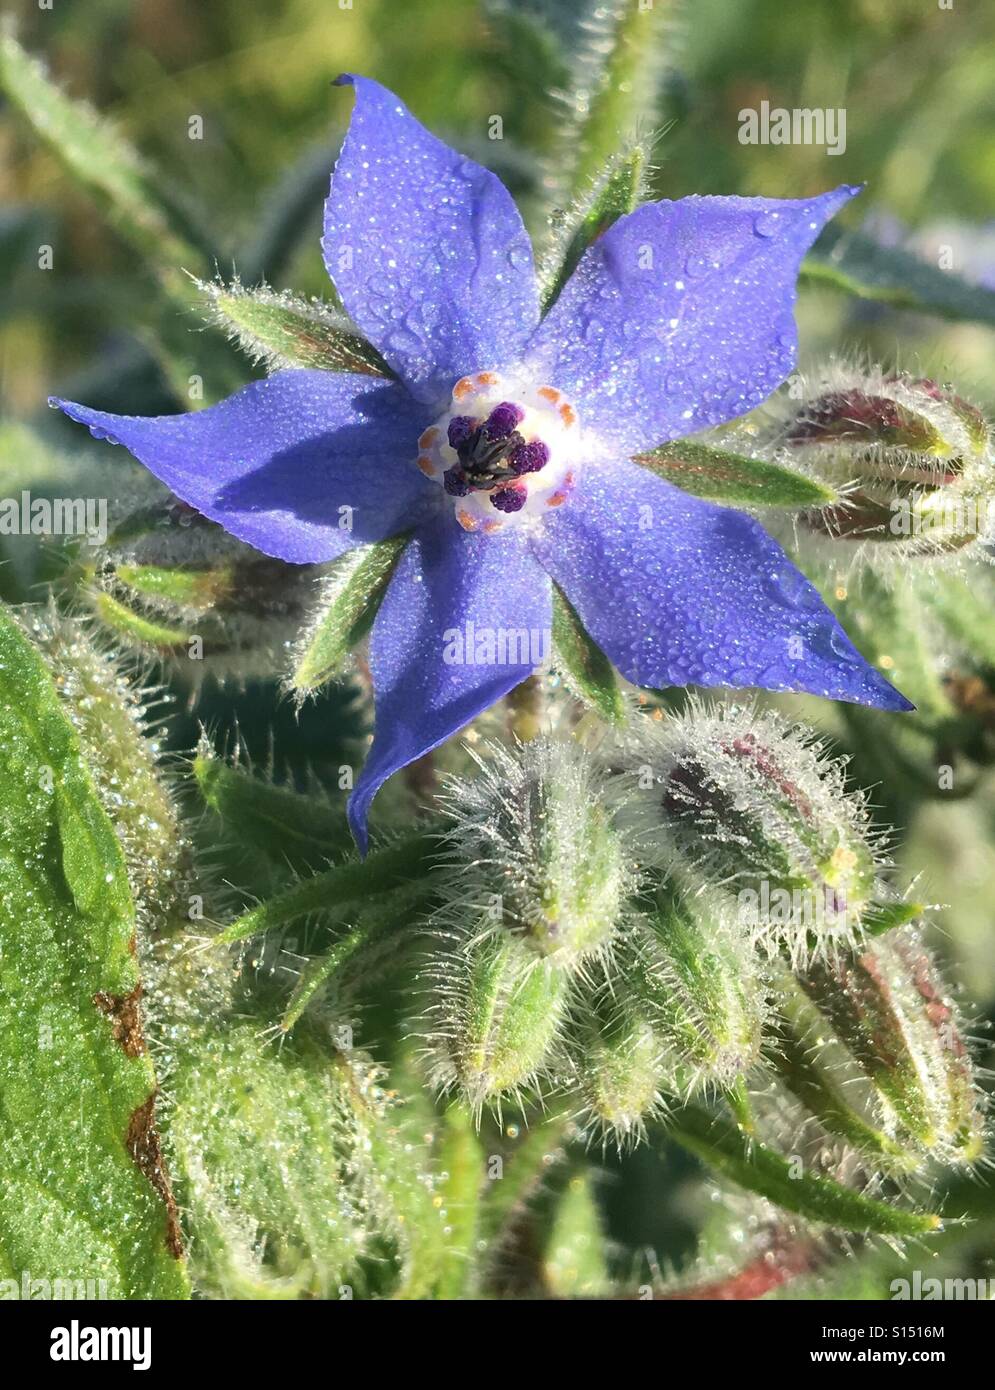 Patterns in Nature - Borage or starflower. Bright blue flower and Stock  Photo - Alamy